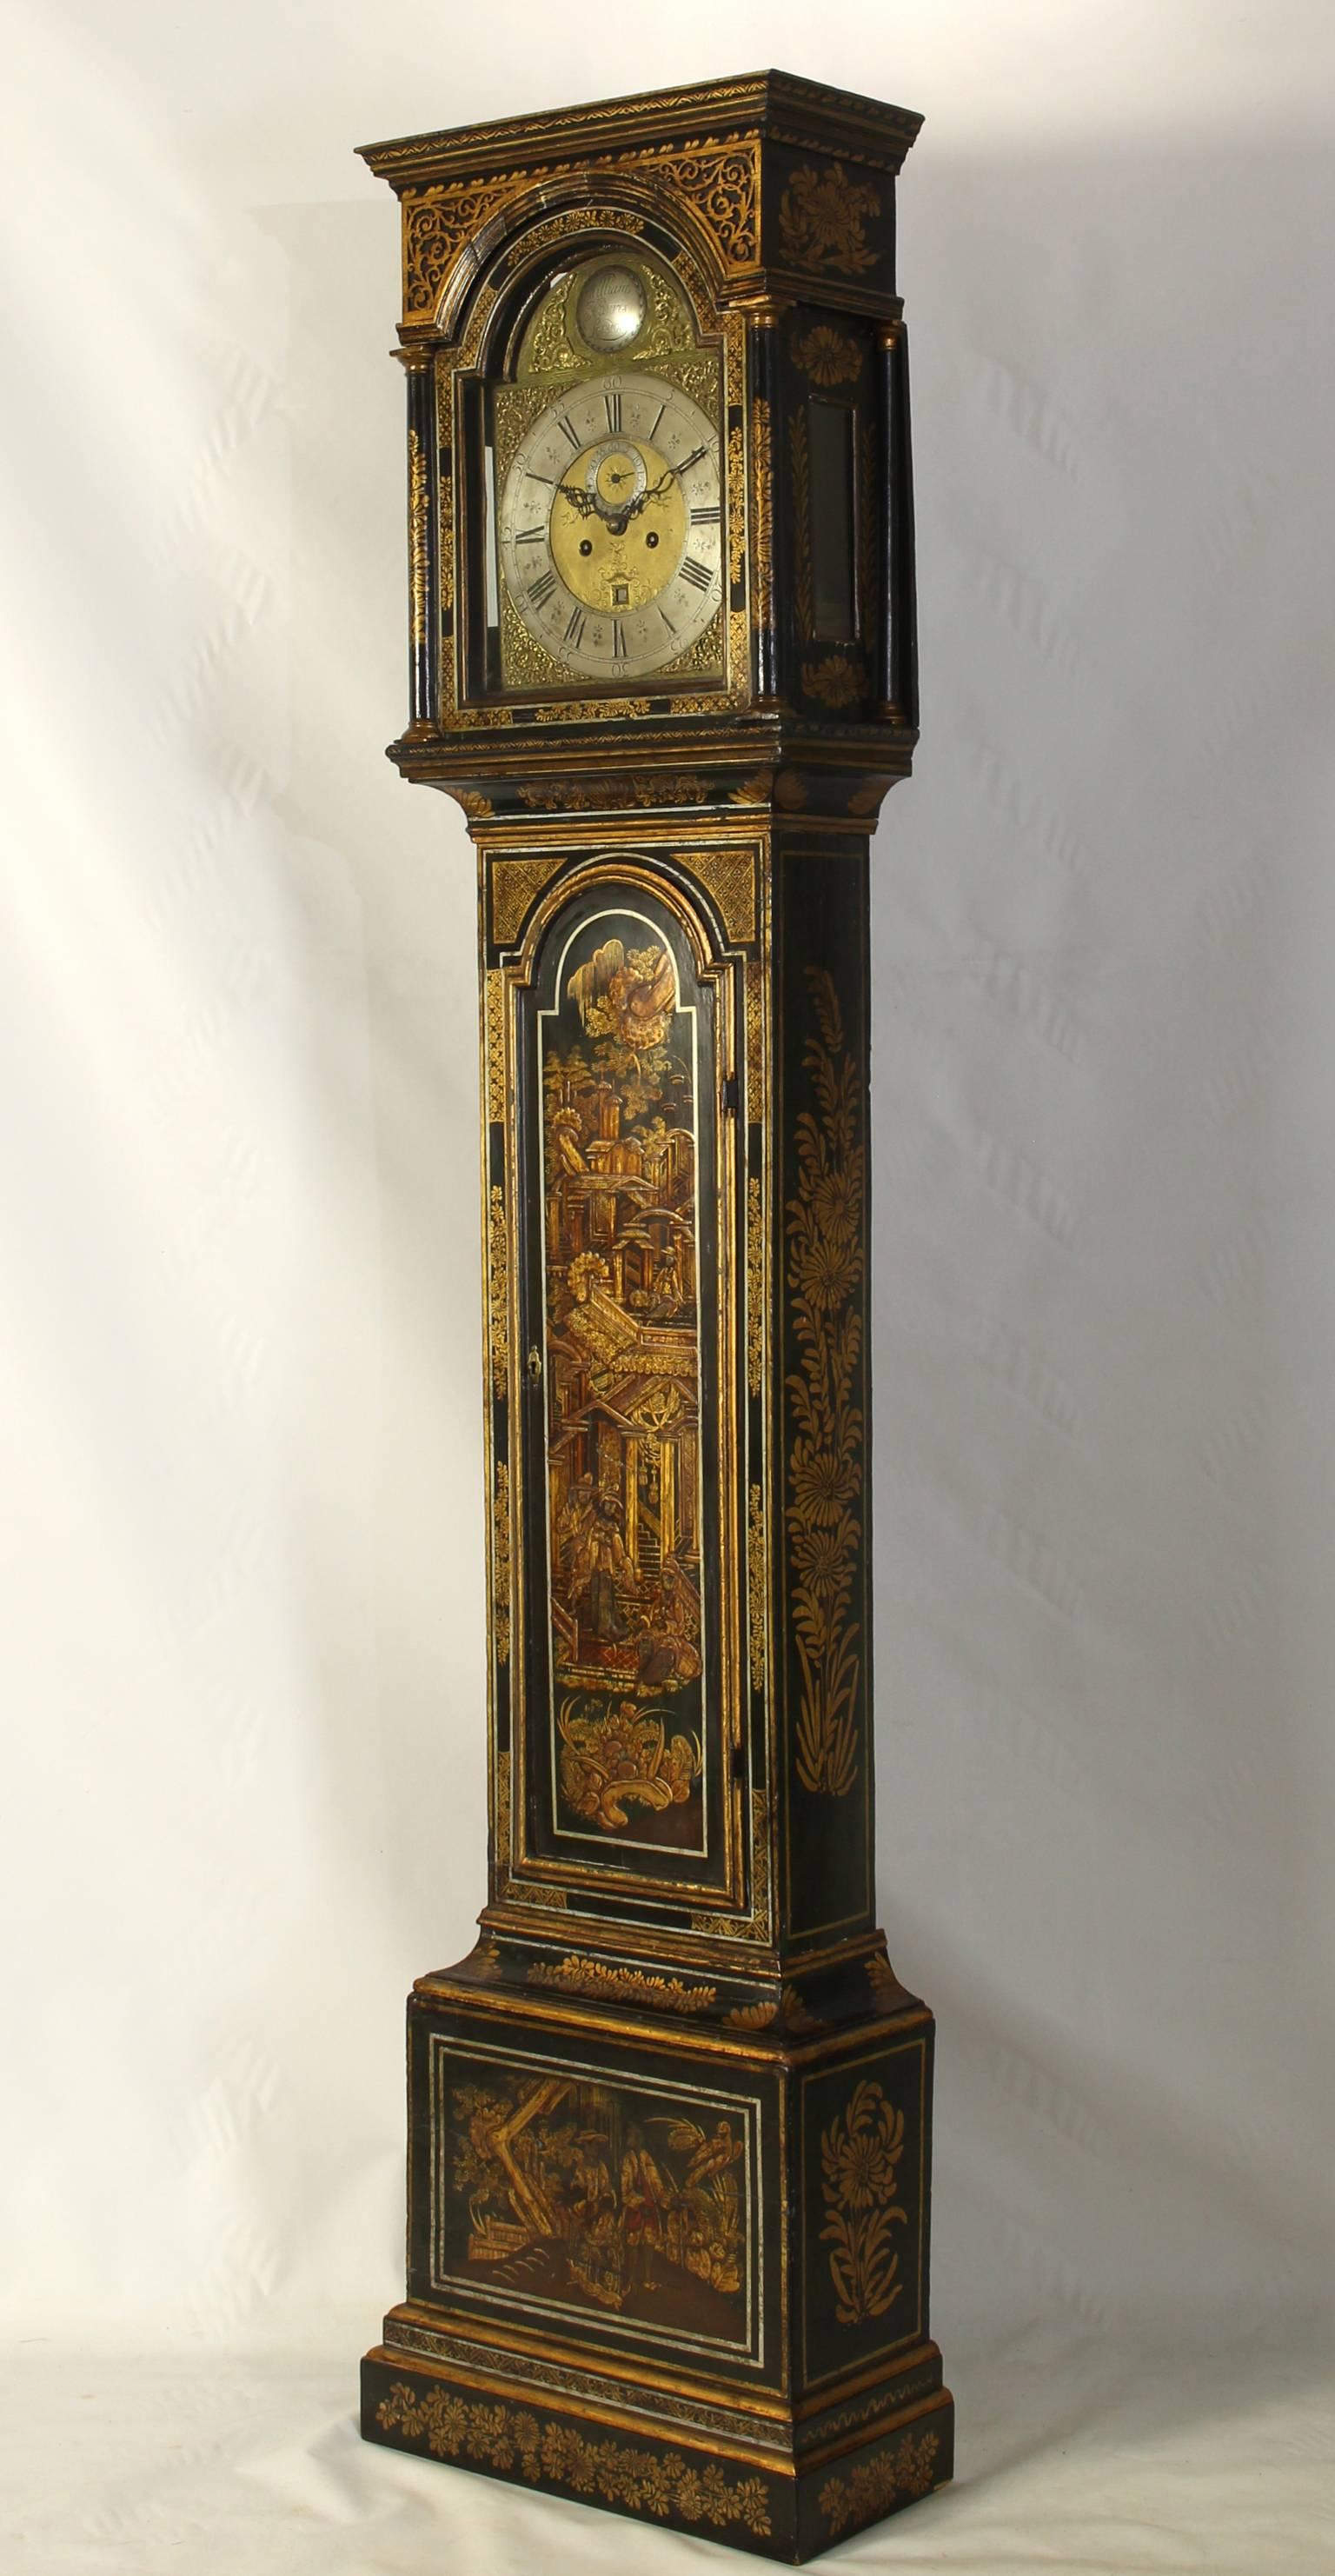 A large and elegant late 18th century English chinoiserie decorated tall case clock in an unusual deep green or blue lacquered background with stylized raised Anglo-Chinese figures in a garden setting by William Harris, London.